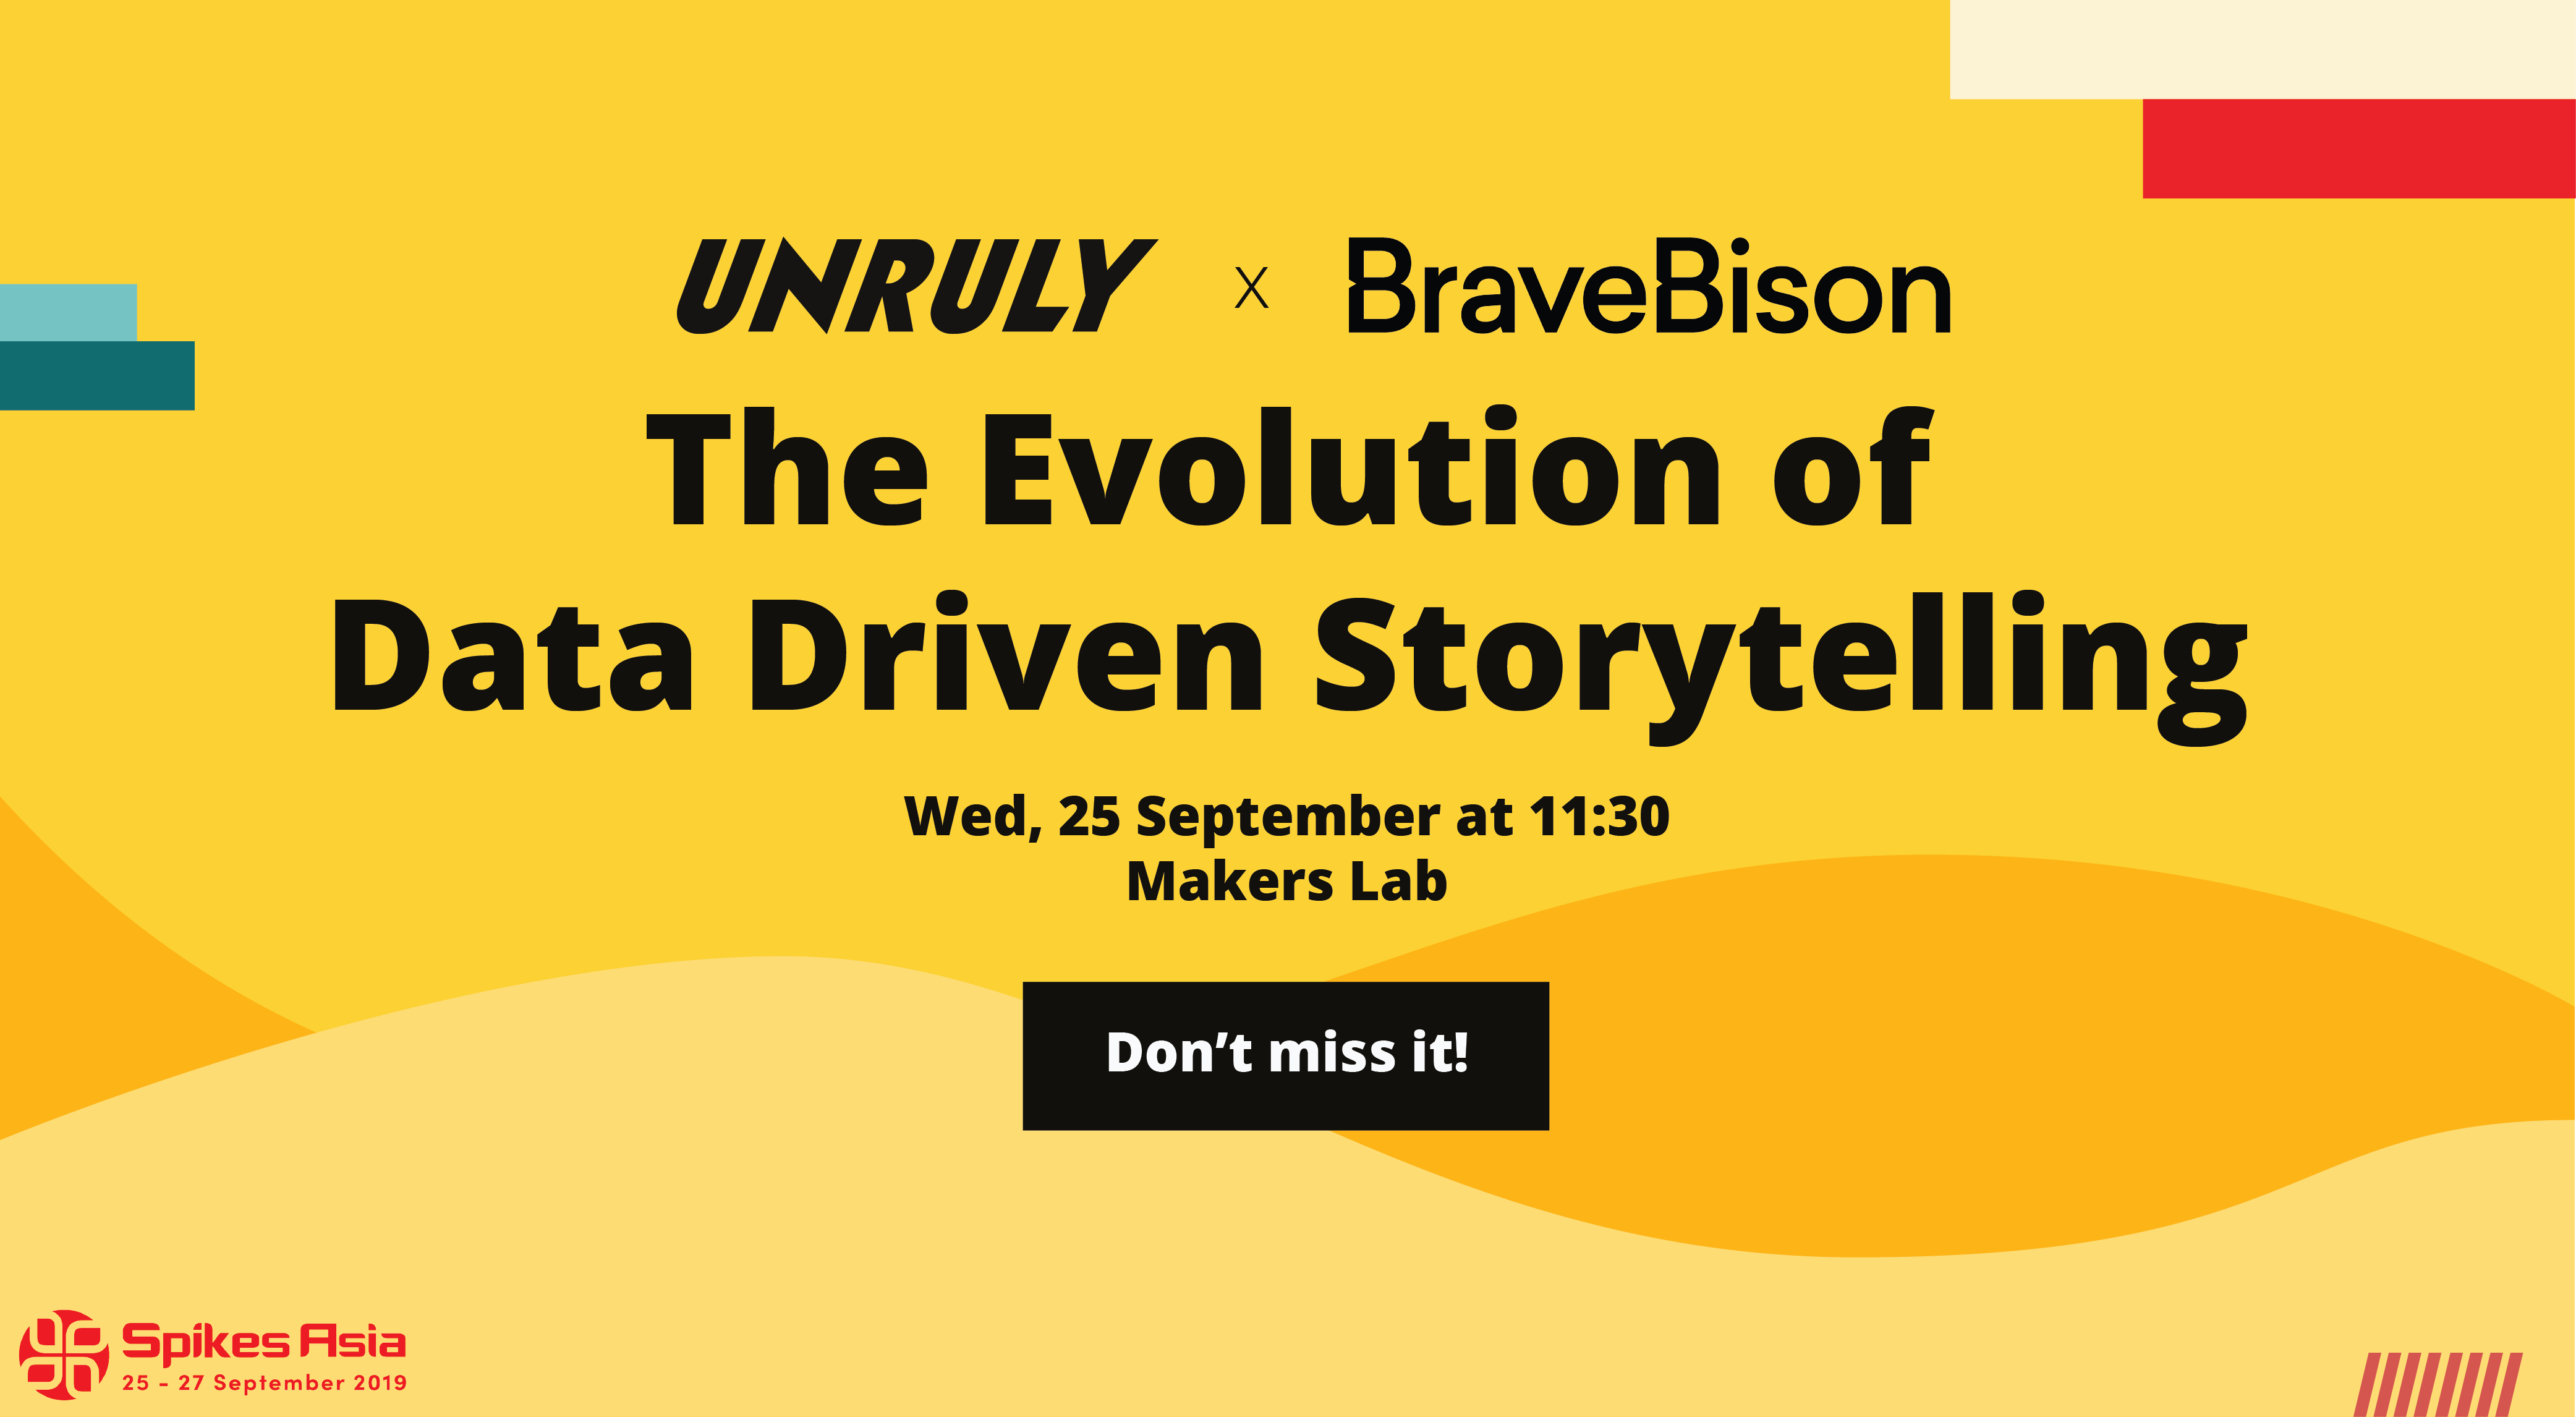 Spikes Asia: The Evolution of Data Driven Storytelling